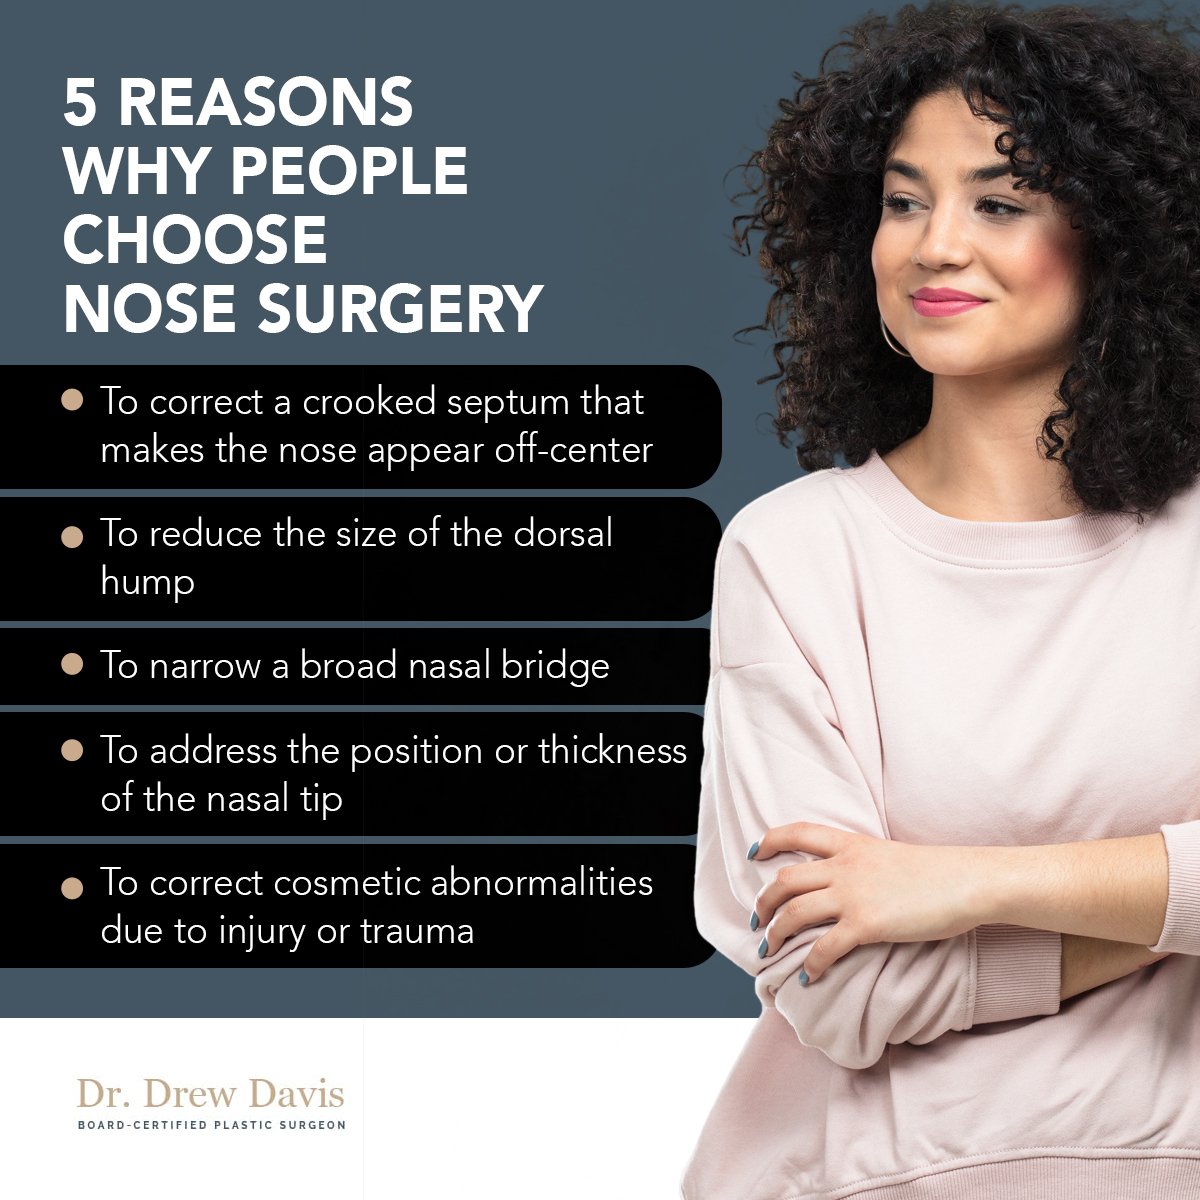 5 Reasons Why People Choose Nose Surgery